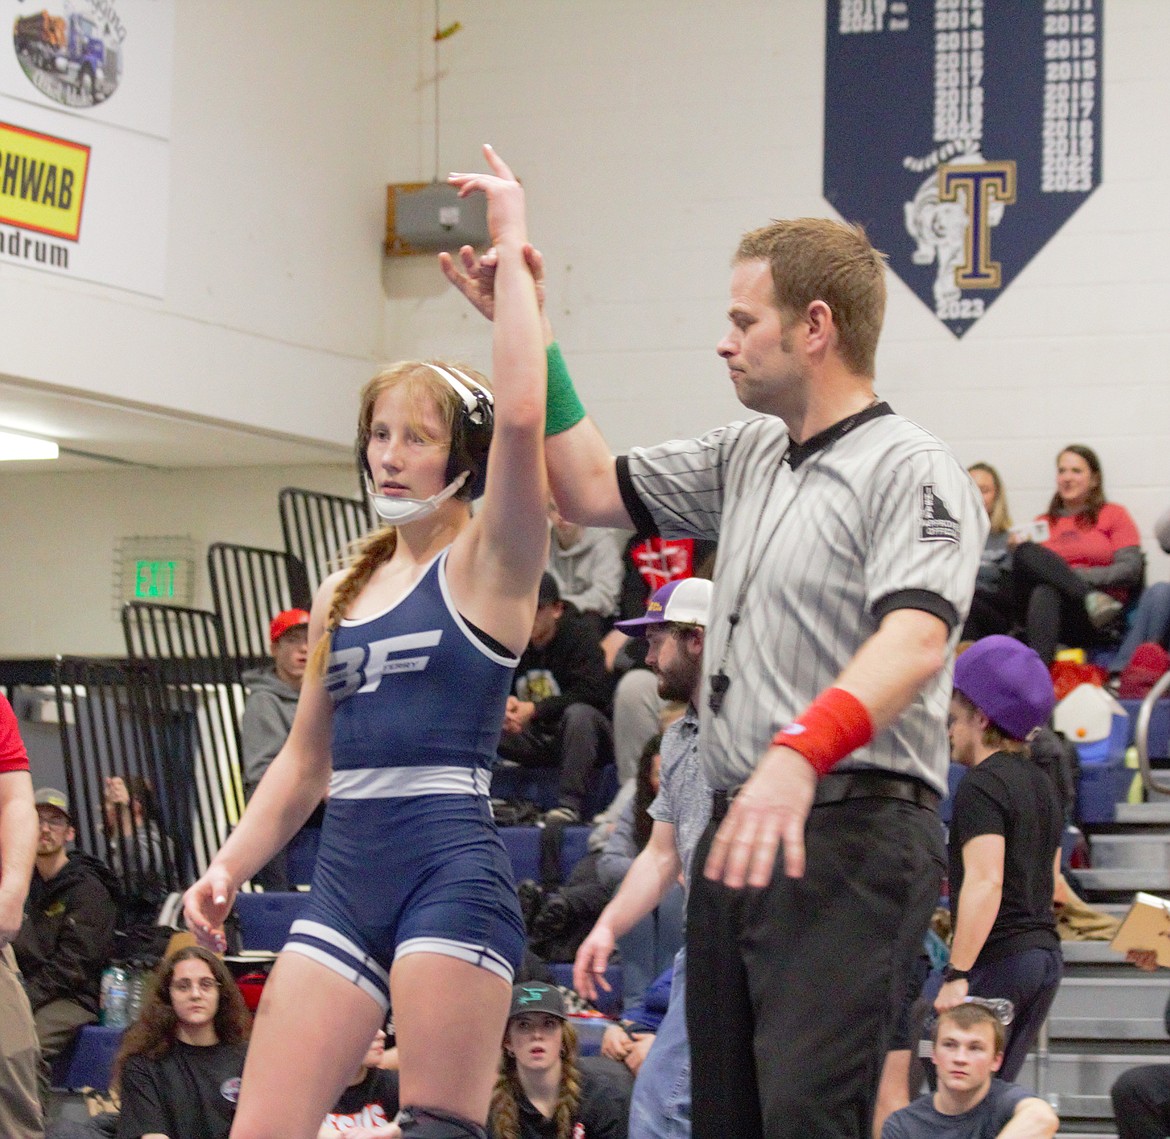 Neveah Therrien wins championship match, making her a two time district champion.